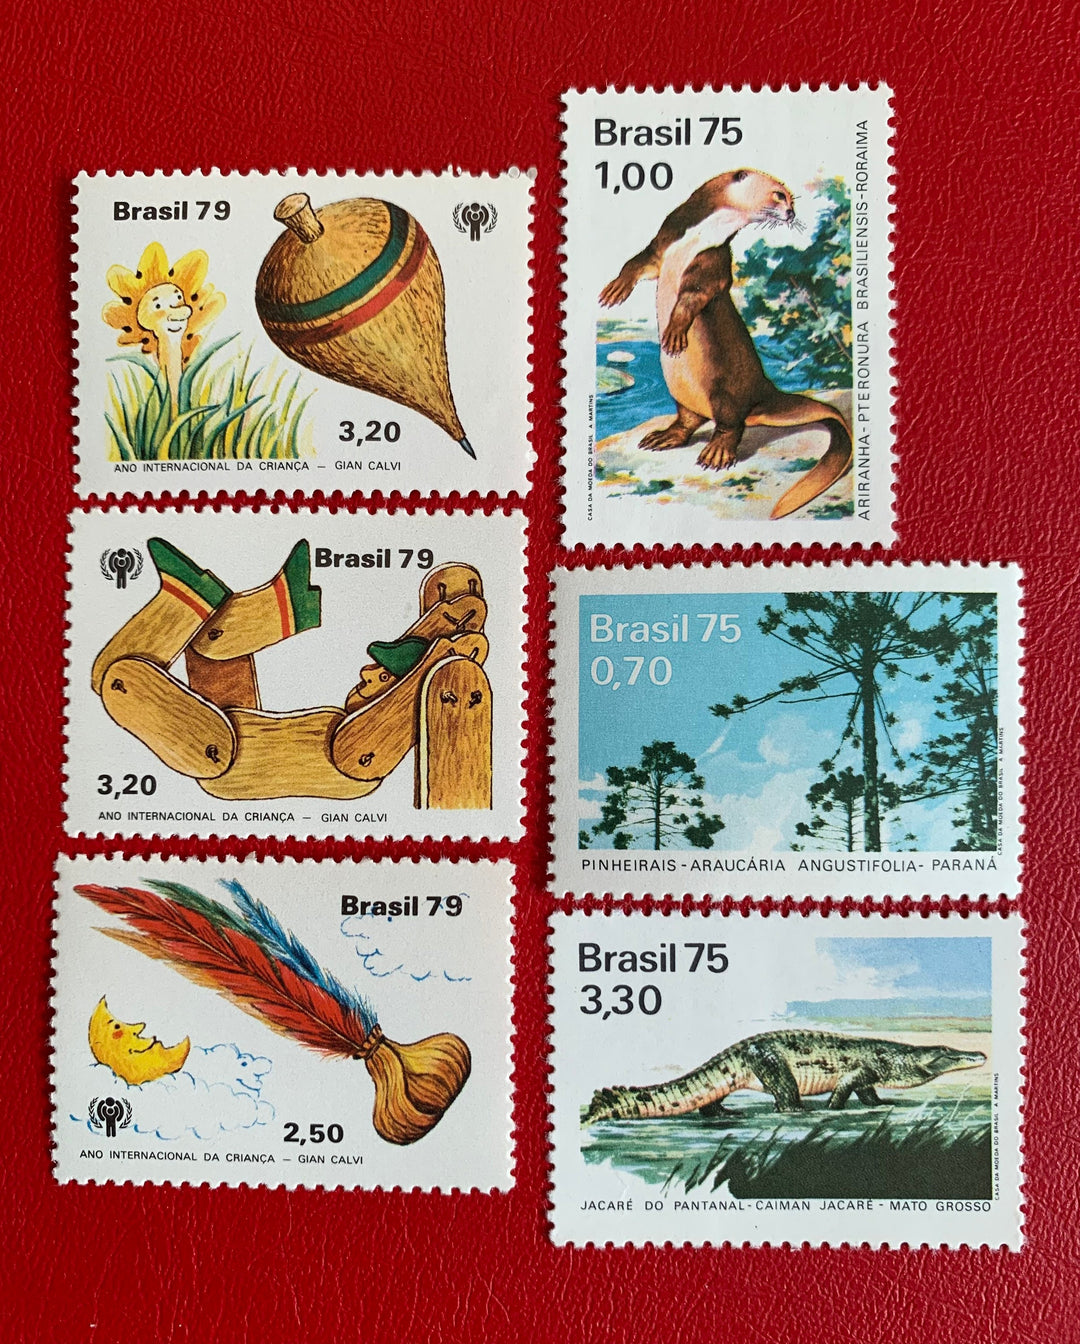 Brazil - Original Vintage Postage Stamps- 1975/79 Toys/Animals/Land- for the collector, artist or crafter - scrapbooks, collage, decoupage